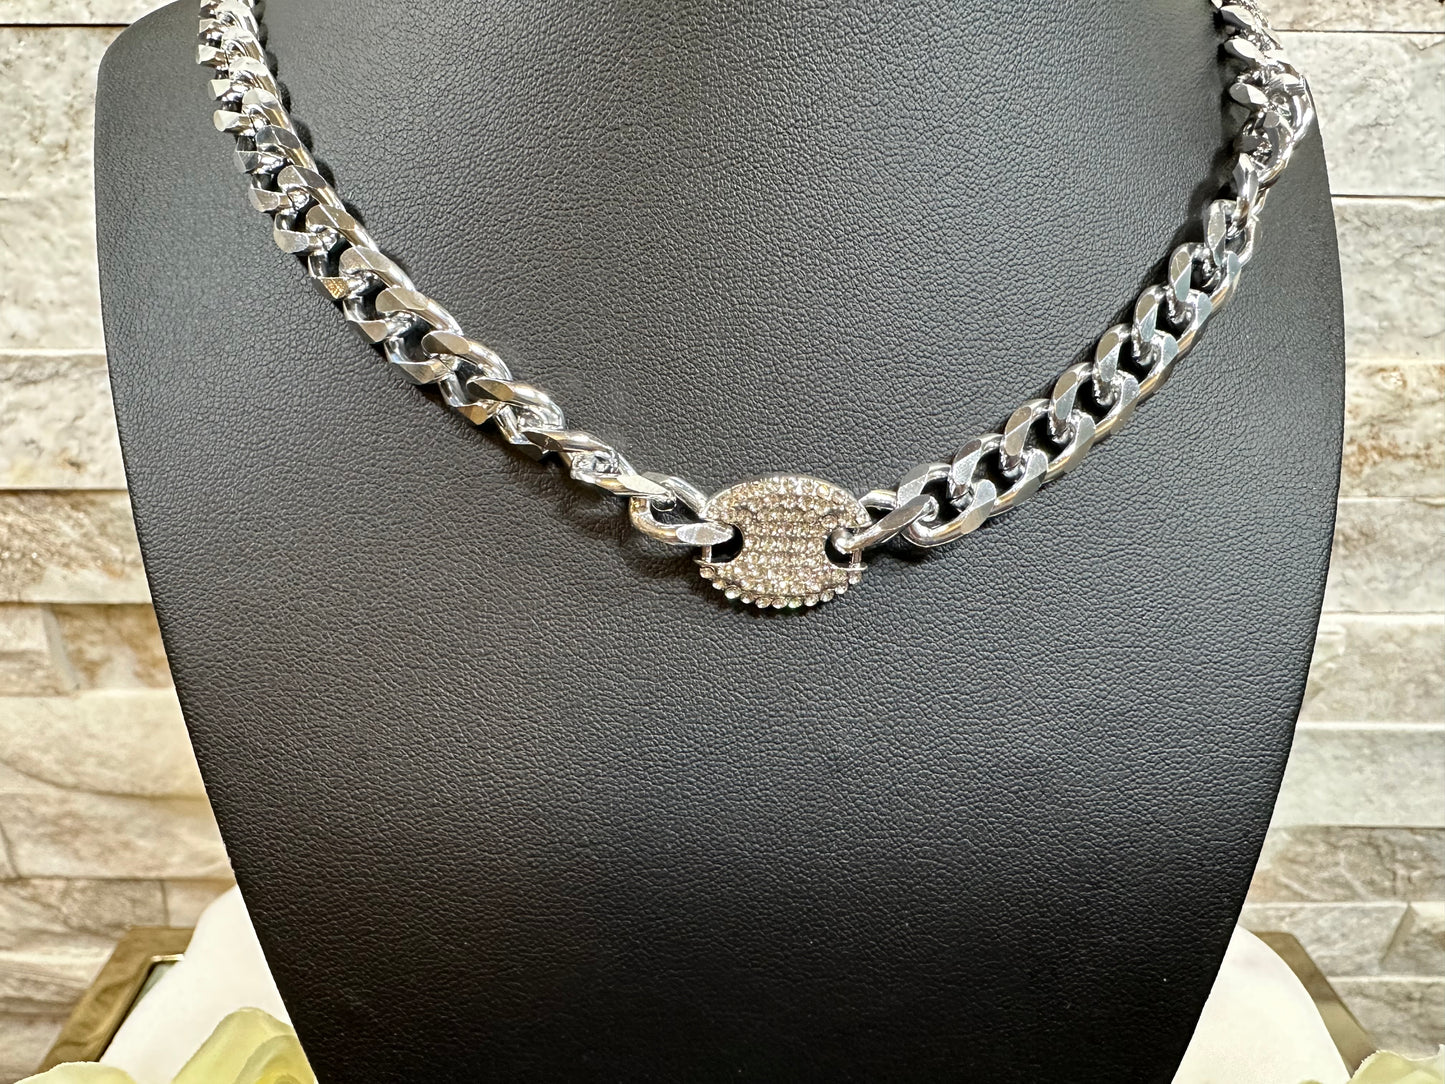 Chain Link Necklace with Rhinstone Pendant